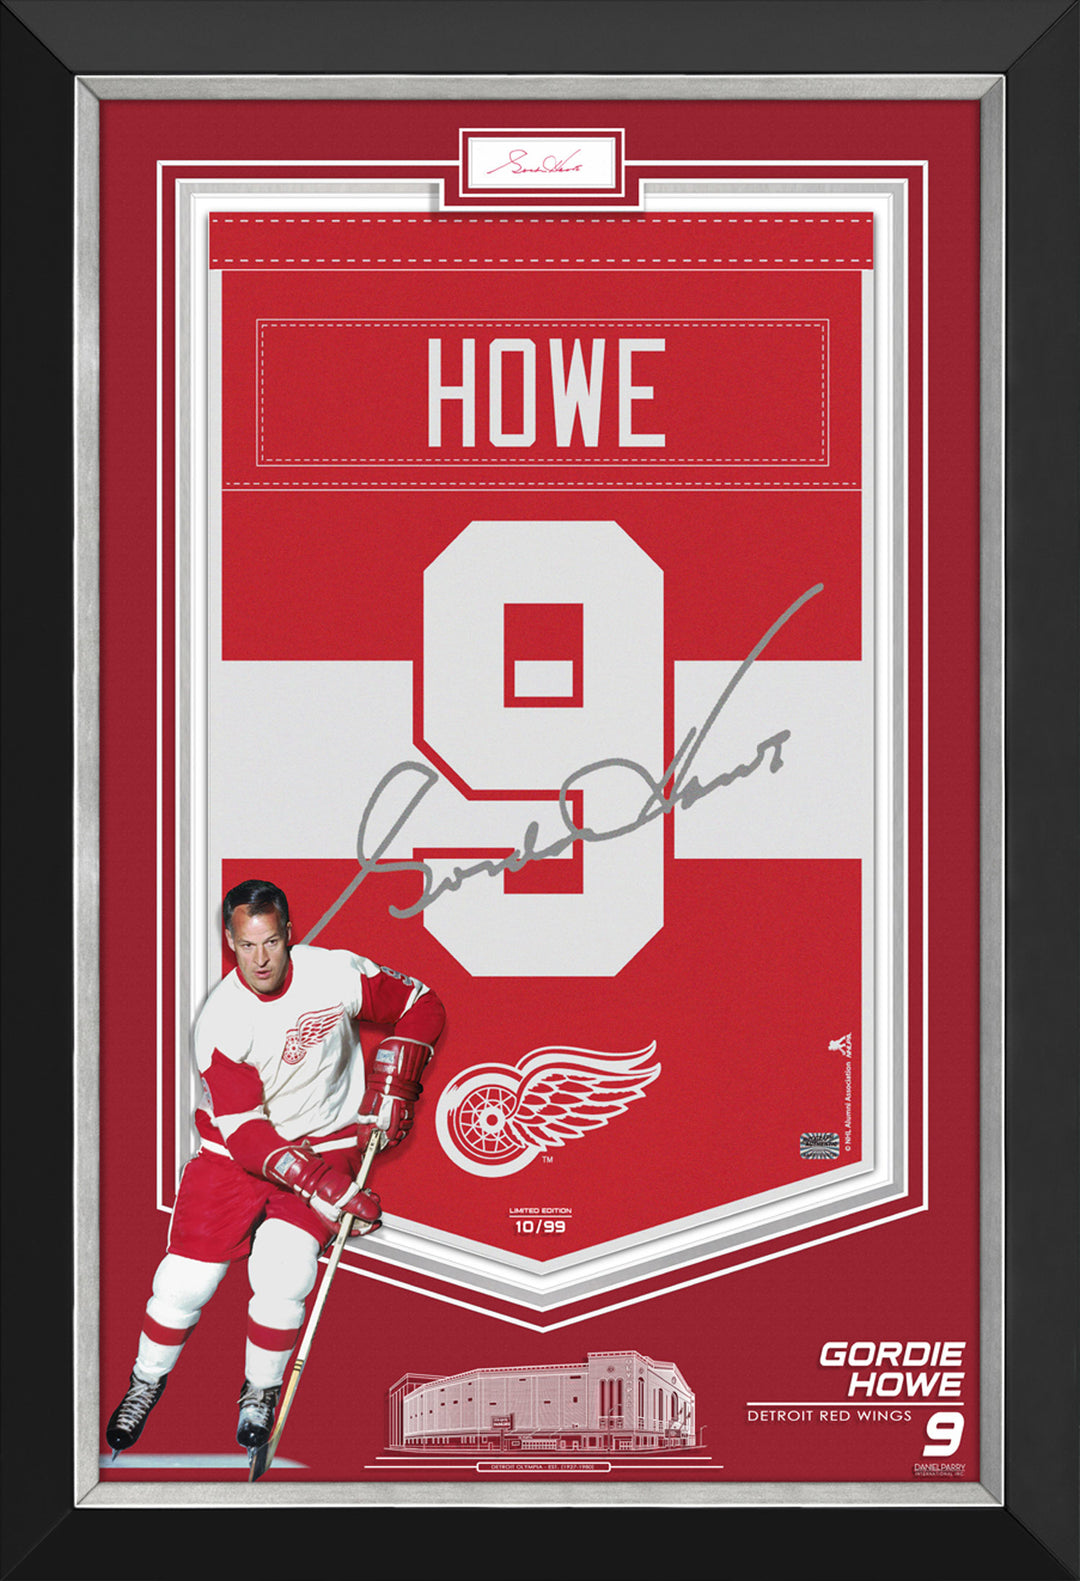 Gordie Howe Framed Arena Banner Limited Edition /99 Red Wings, Cut Signature, Detroit Red Wings, NHL, Hockey, Autographed, Signed, AAABH32589